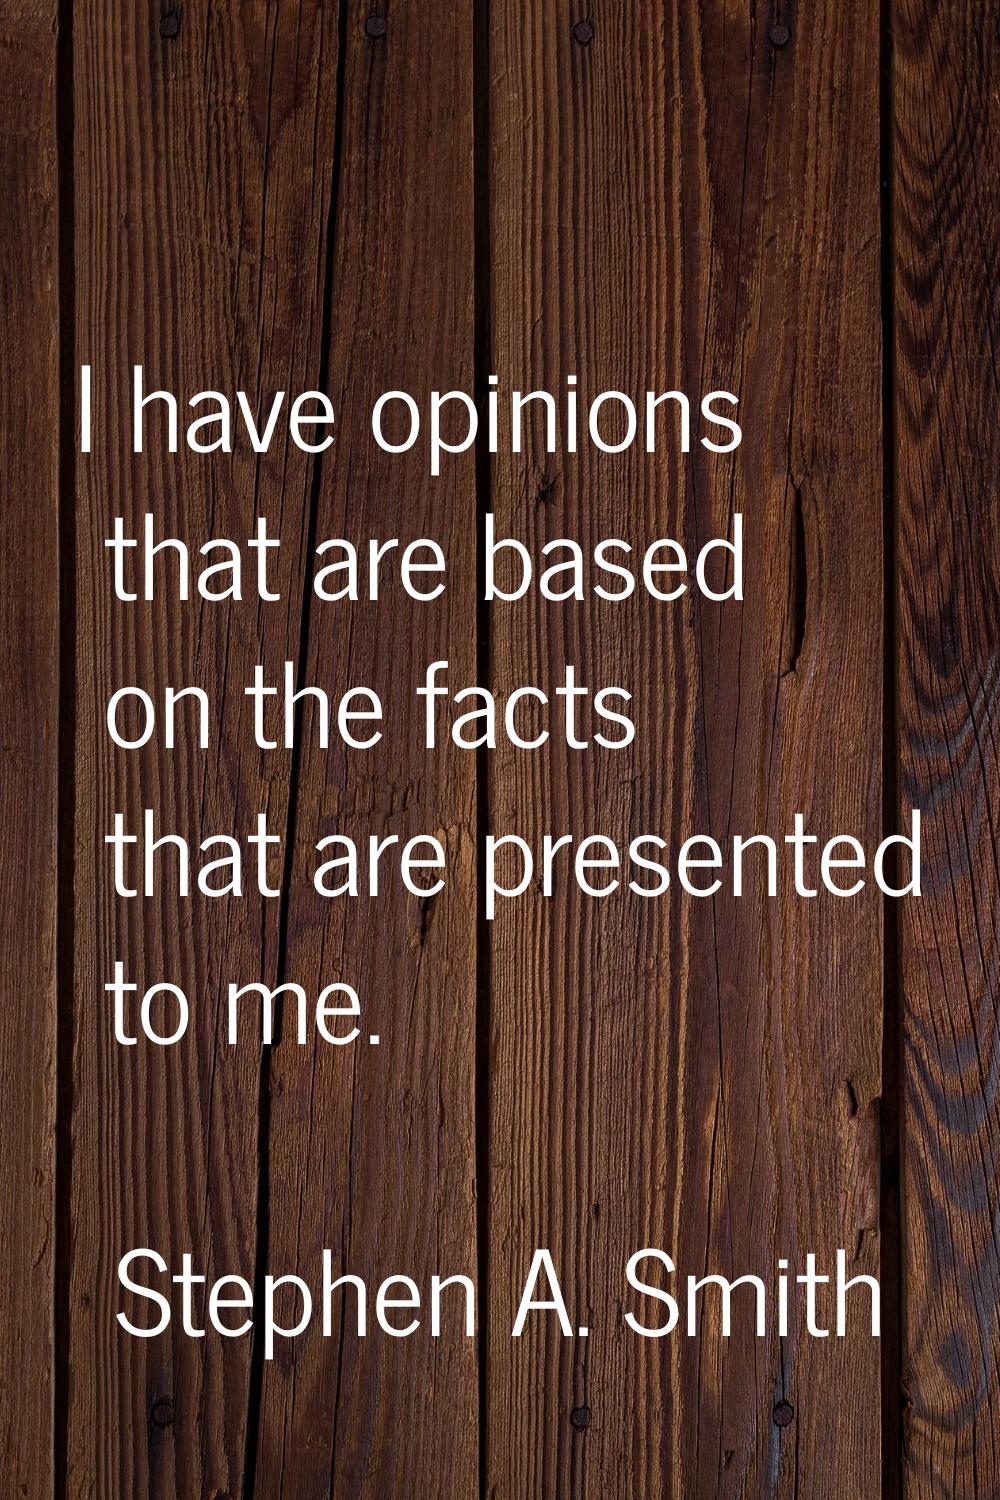 I have opinions that are based on the facts that are presented to me.